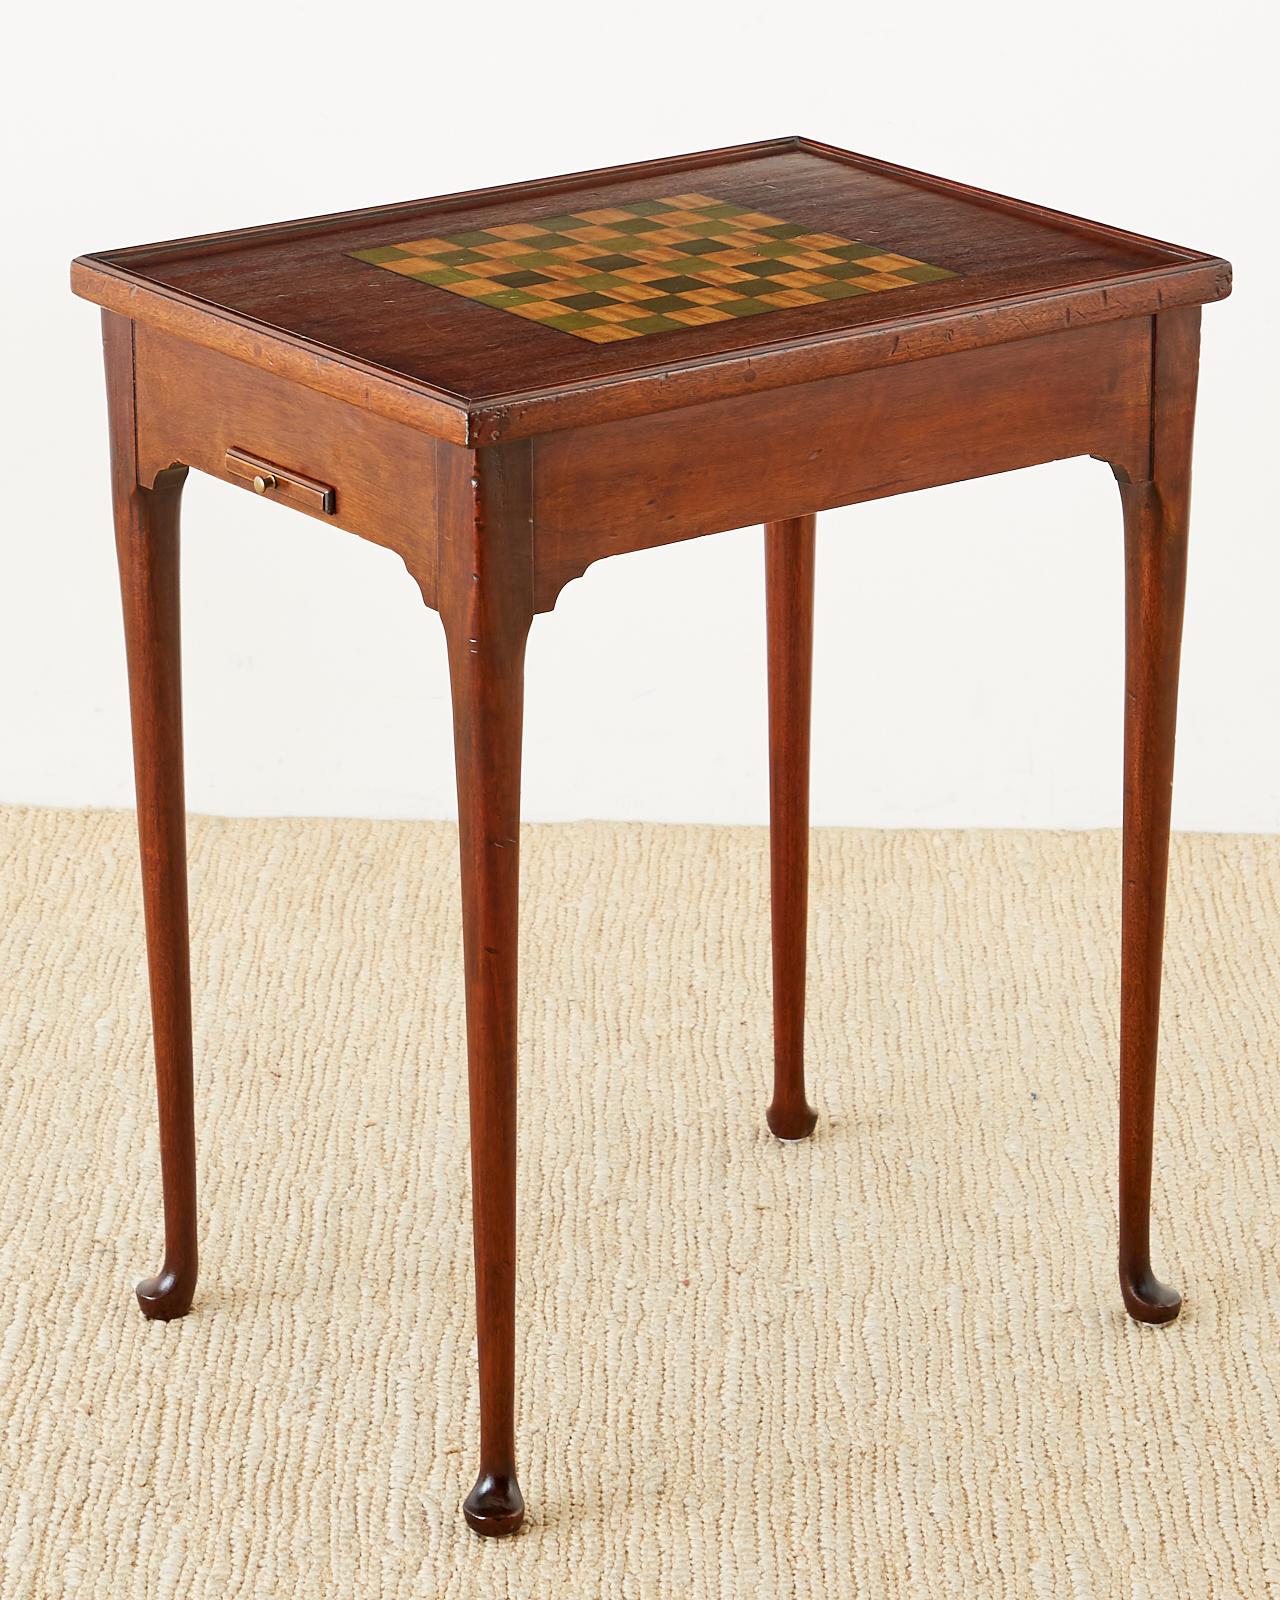 20th Century Queen Anne Style Mahogany Flip-Top Game Table